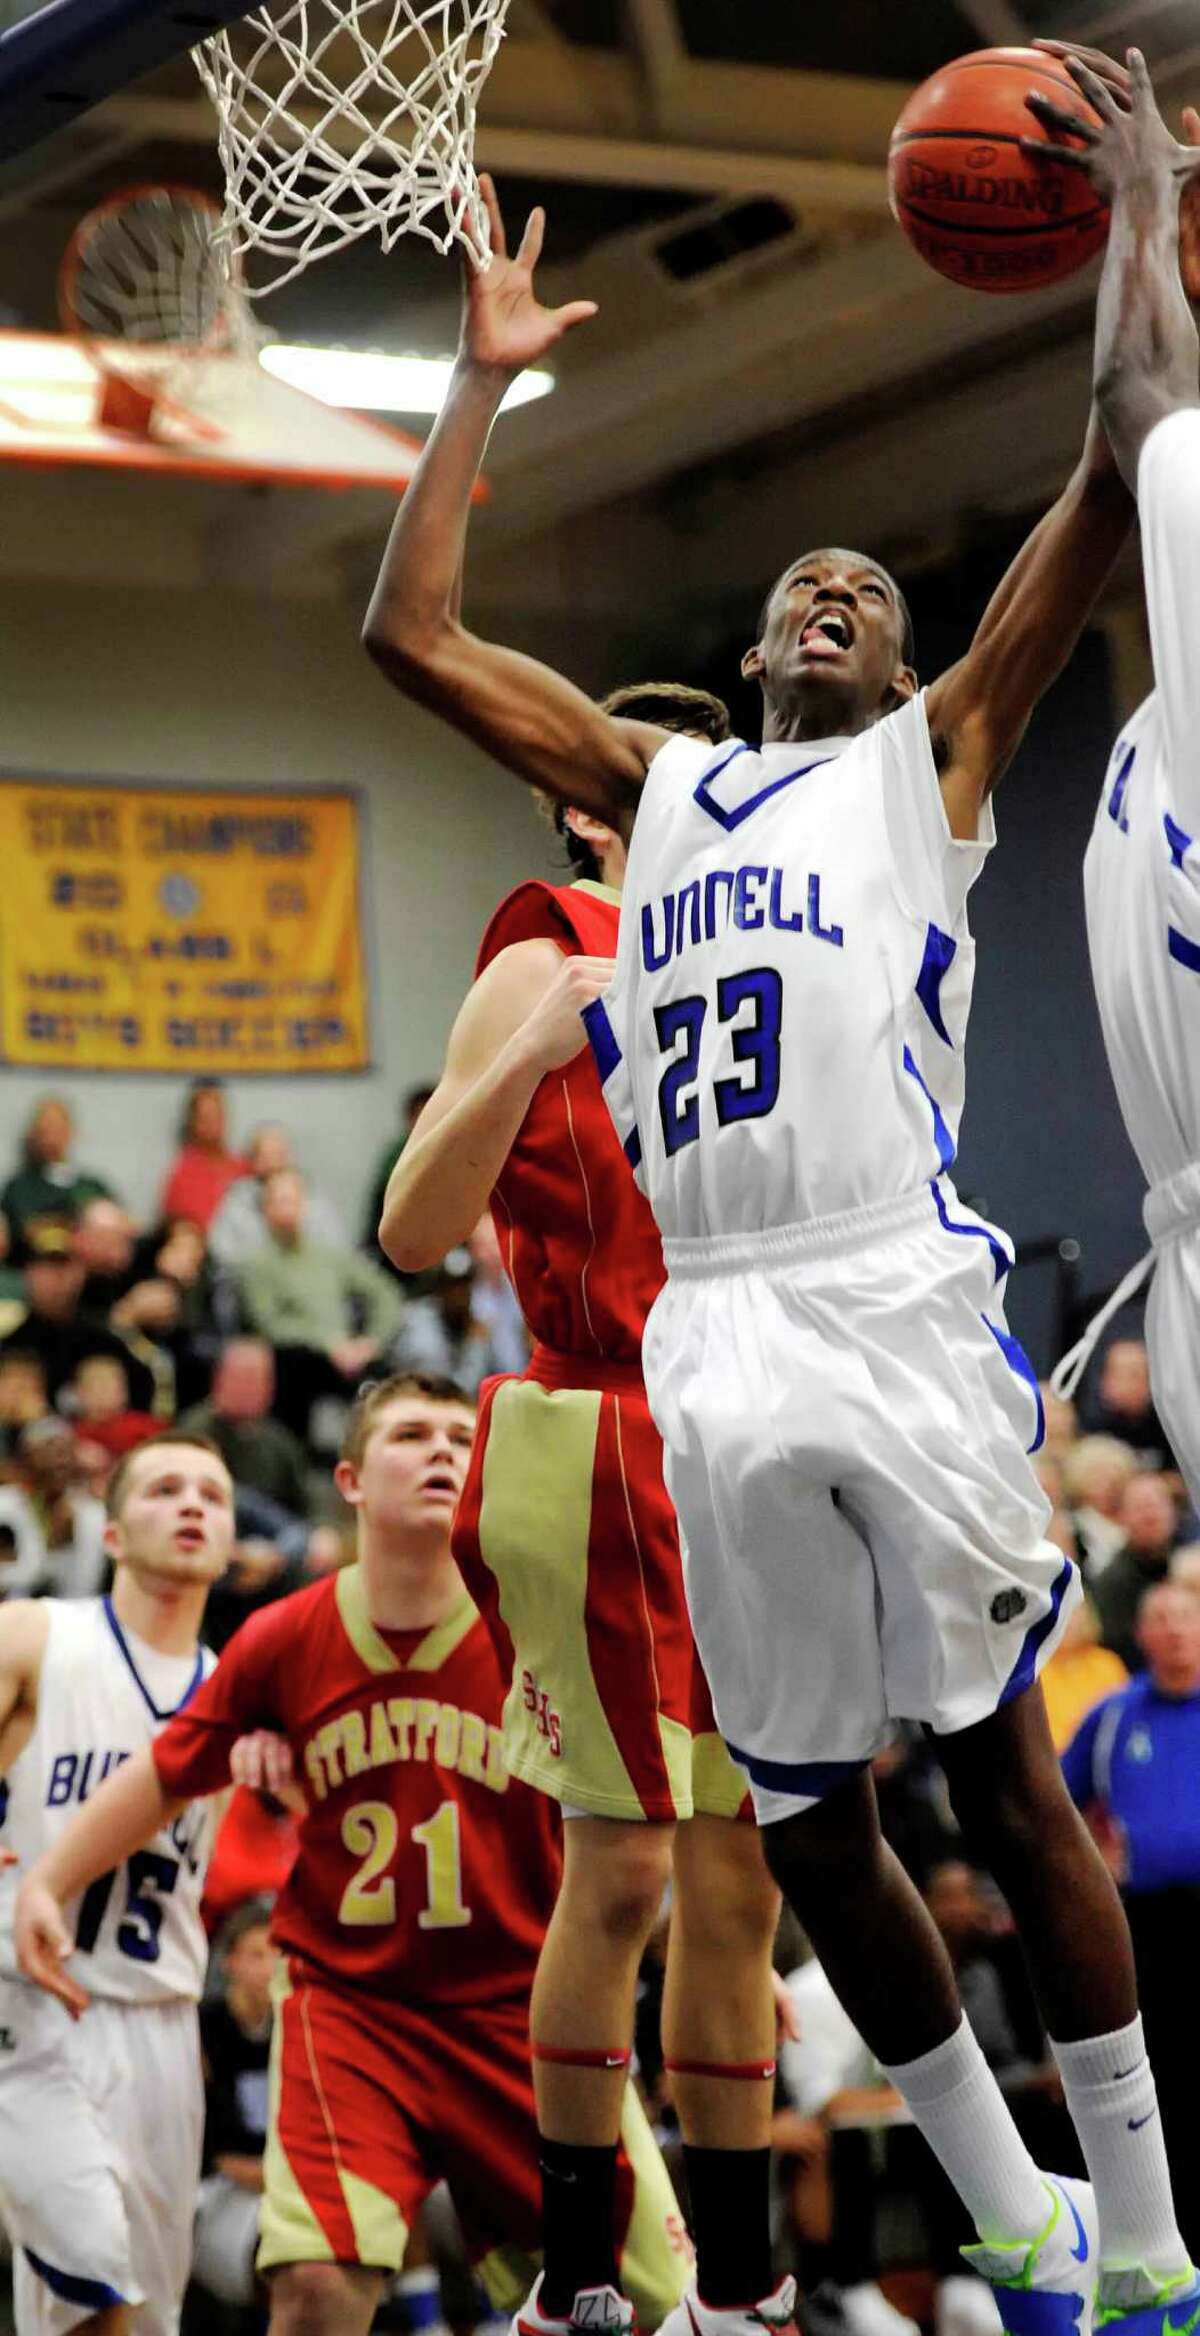 Bunnell high school's Issac Vann goes up for a rebound in a boys basketball game against Stratford high school played at Bunnell high school, Stratford, CT on Saturday, December 22nd, 2012.